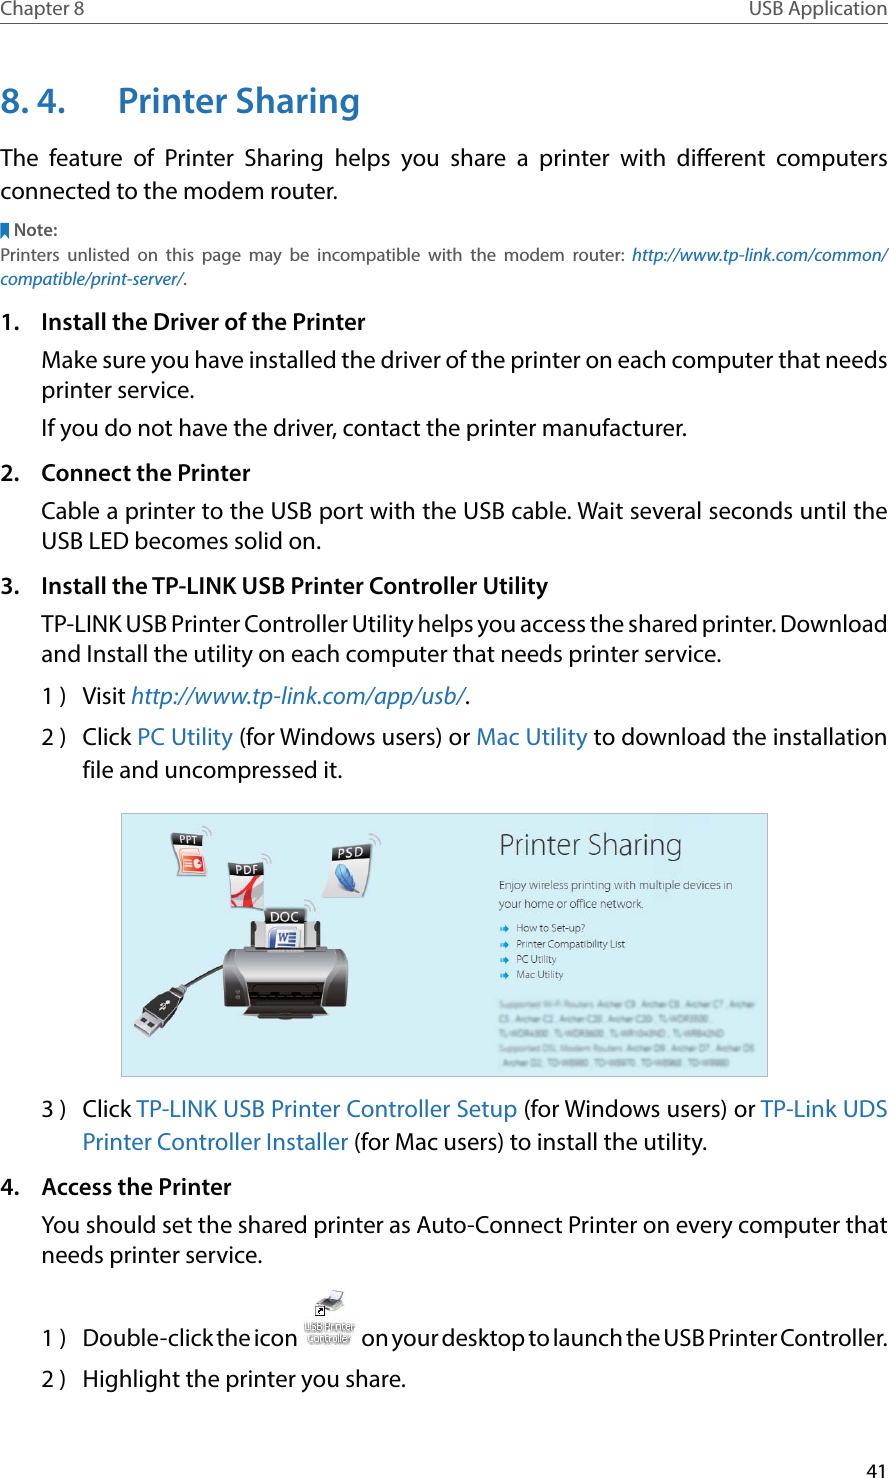 41Chapter 8 USB Application8. 4.  Printer SharingThe feature of Printer Sharing helps you share a printer with different computers connected to the modem router.Note:Printers unlisted on this page may be incompatible with the modem router: http://www.tp-link.com/common/compatible/print-server/.1.  Install the Driver of the PrinterMake sure you have installed the driver of the printer on each computer that needs printer service.If you do not have the driver, contact the printer manufacturer.2.  Connect the PrinterCable a printer to the USB port with the USB cable. Wait several seconds until the USB LED becomes solid on.3.  Install the TP-LINK USB Printer Controller UtilityTP-LINK USB Printer Controller Utility helps you access the shared printer. Download and Install the utility on each computer that needs printer service.1 )  Visit http://www.tp-link.com/app/usb/.2 )  Click PC Utility (for Windows users) or Mac Utility to download the installation file and uncompressed it.3 )  Click TP-LINK USB Printer Controller Setup (for Windows users) or TP-Link UDS Printer Controller Installer (for Mac users) to install the utility.4.  Access the PrinterYou should set the shared printer as Auto-Connect Printer on every computer that needs printer service.1  )  Double-click the icon   on your desktop to launch the USB Printer Controller.2 )  Highlight the printer you share.